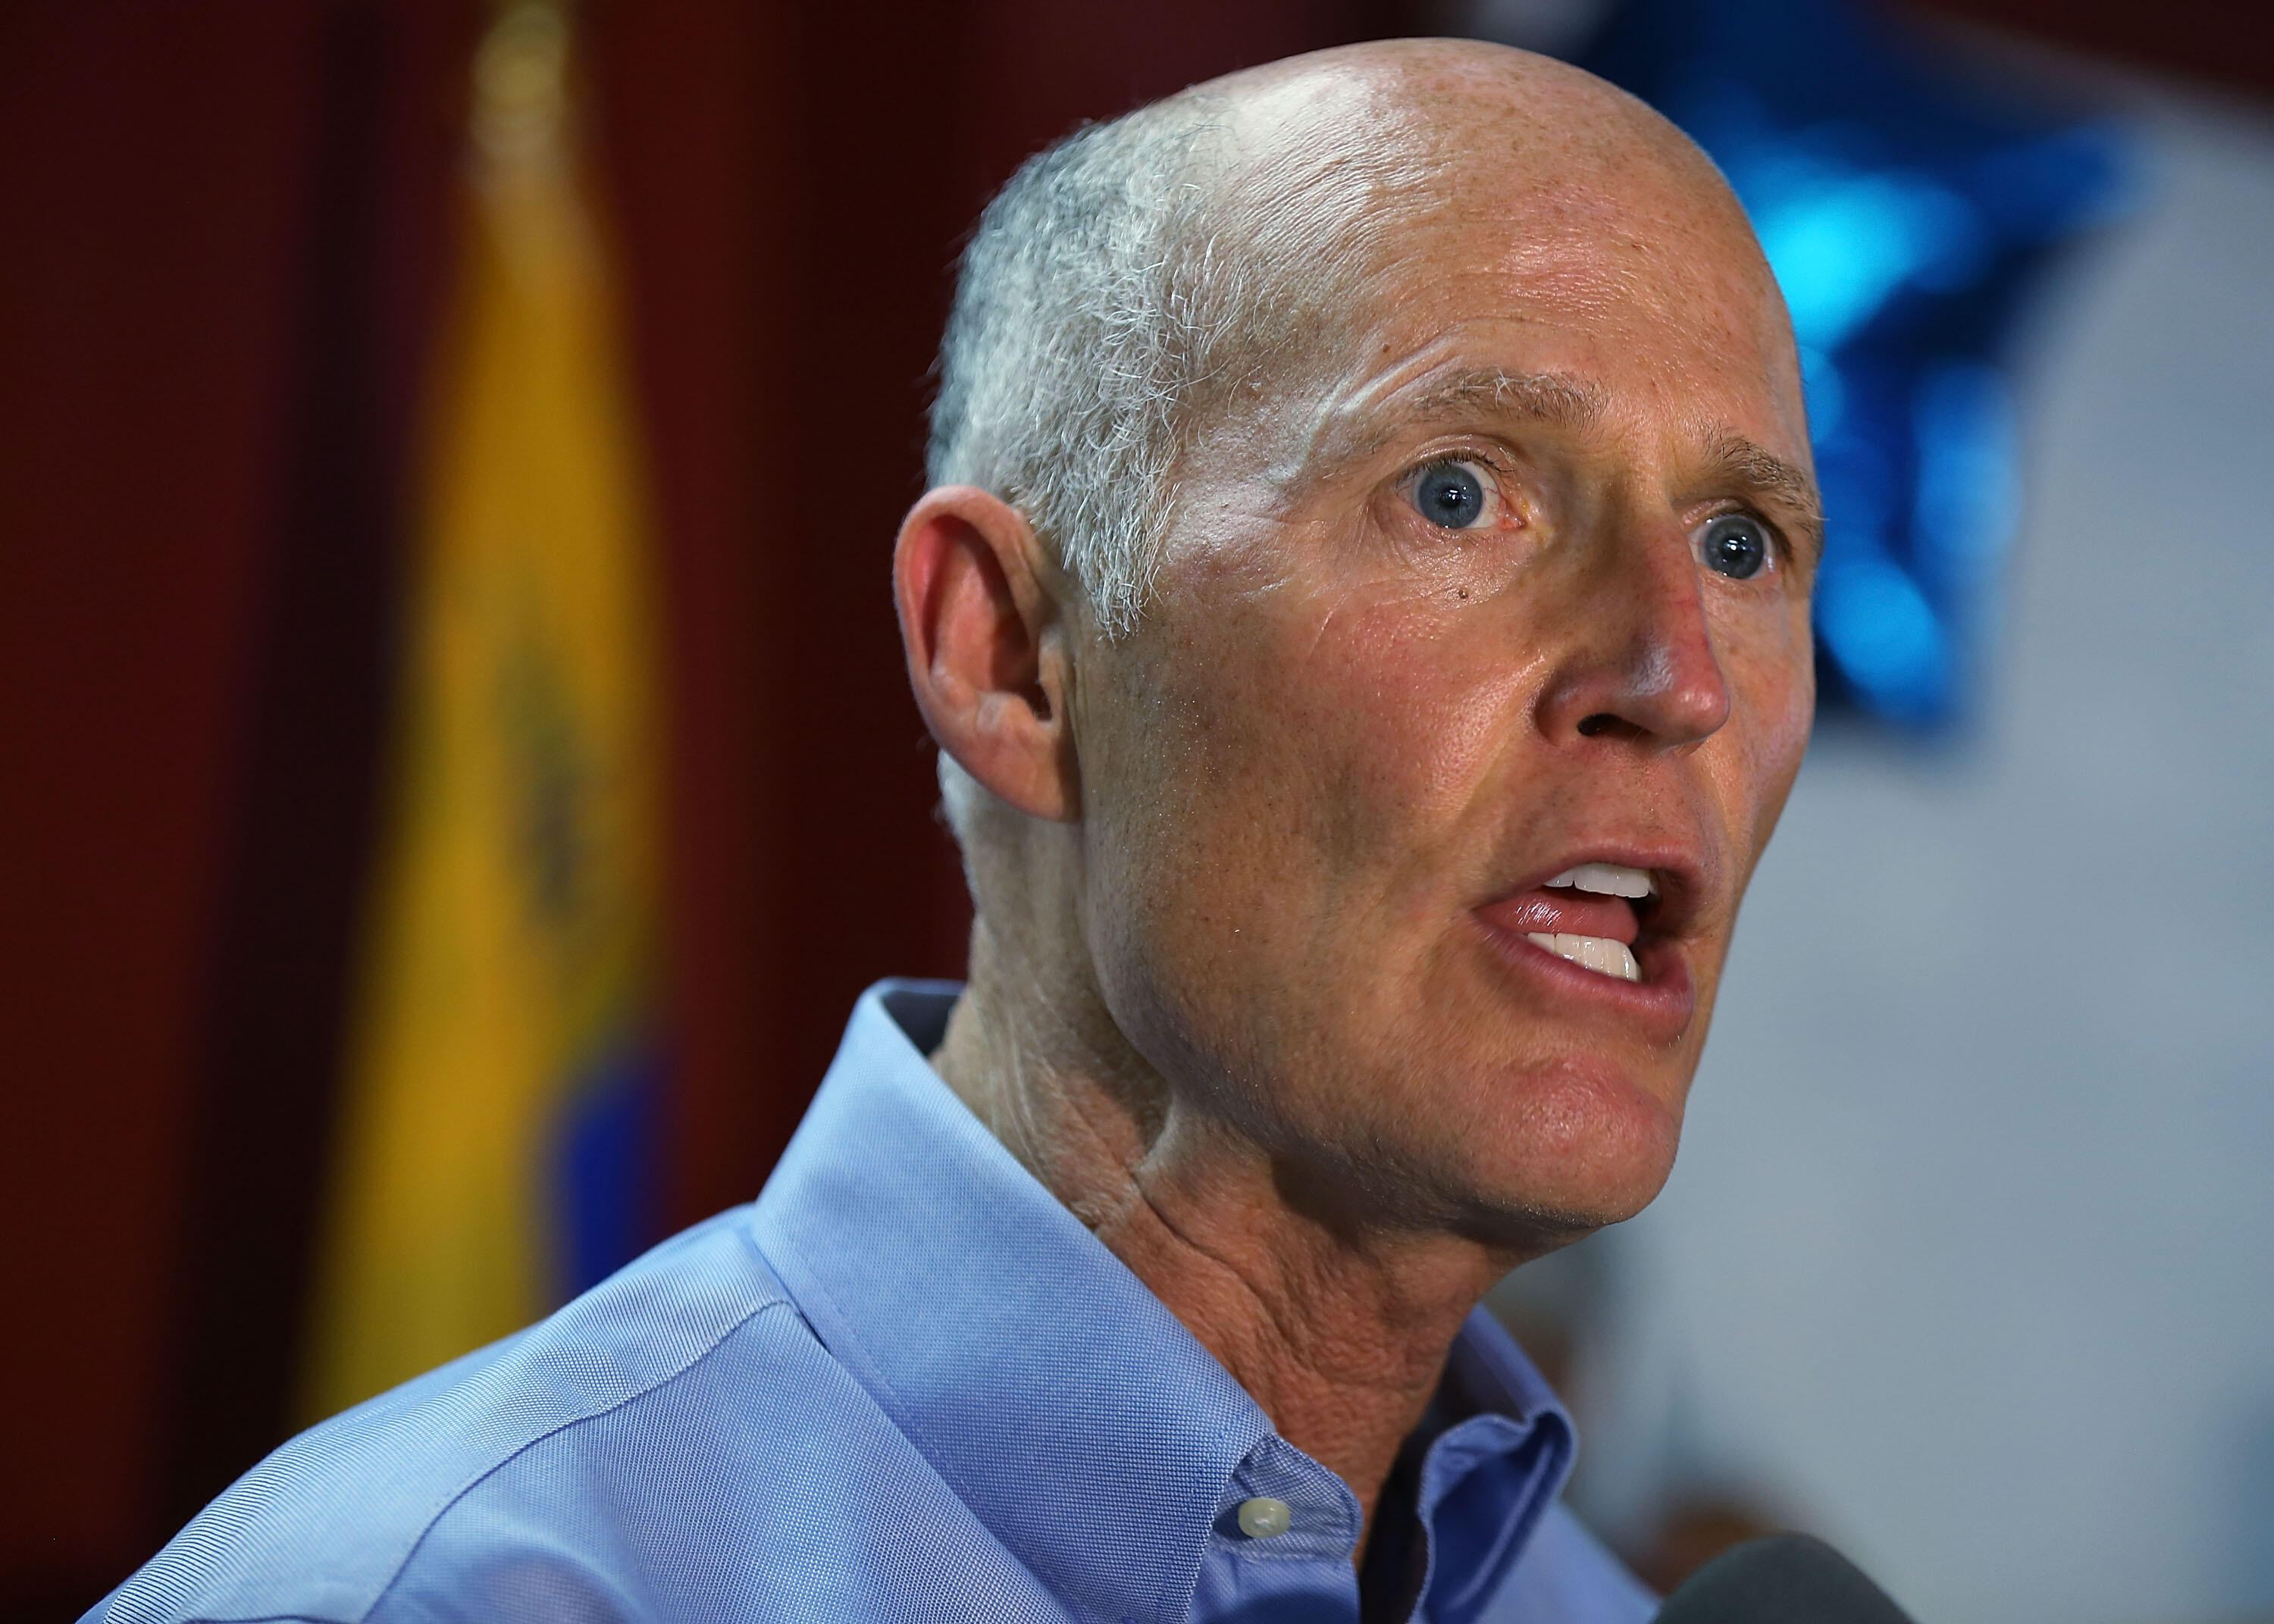 MIAMI, FL - JULY 10: Florida Governor Rick Scott speaks as he holds a Venezuelan Freedom Rally at El Arepazo 2 restaurant on July 10, 2017, in Miami, Florida. Governor Scott called on the Venezuelan government to free Leopoldo Lopez, a political prisoner from house arrest, as well as those that have been wrongly imprisoned by Nicolas Maduro's government. (Photo by Joe Raedle/Getty Images)